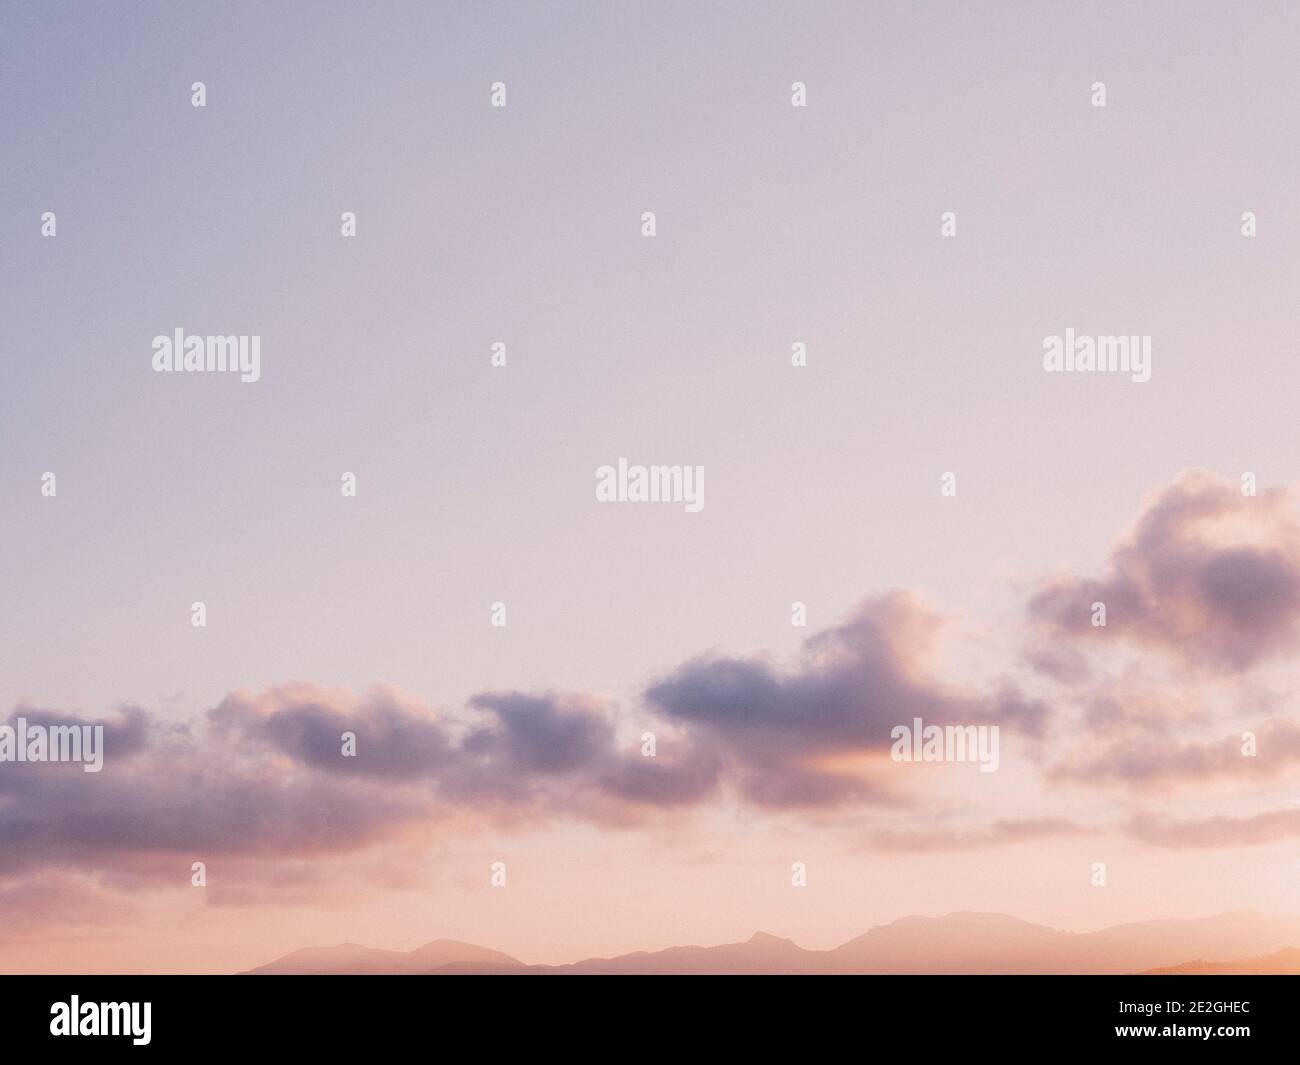 Pale purple and clouds in tranquil sunset sky Stock Photo